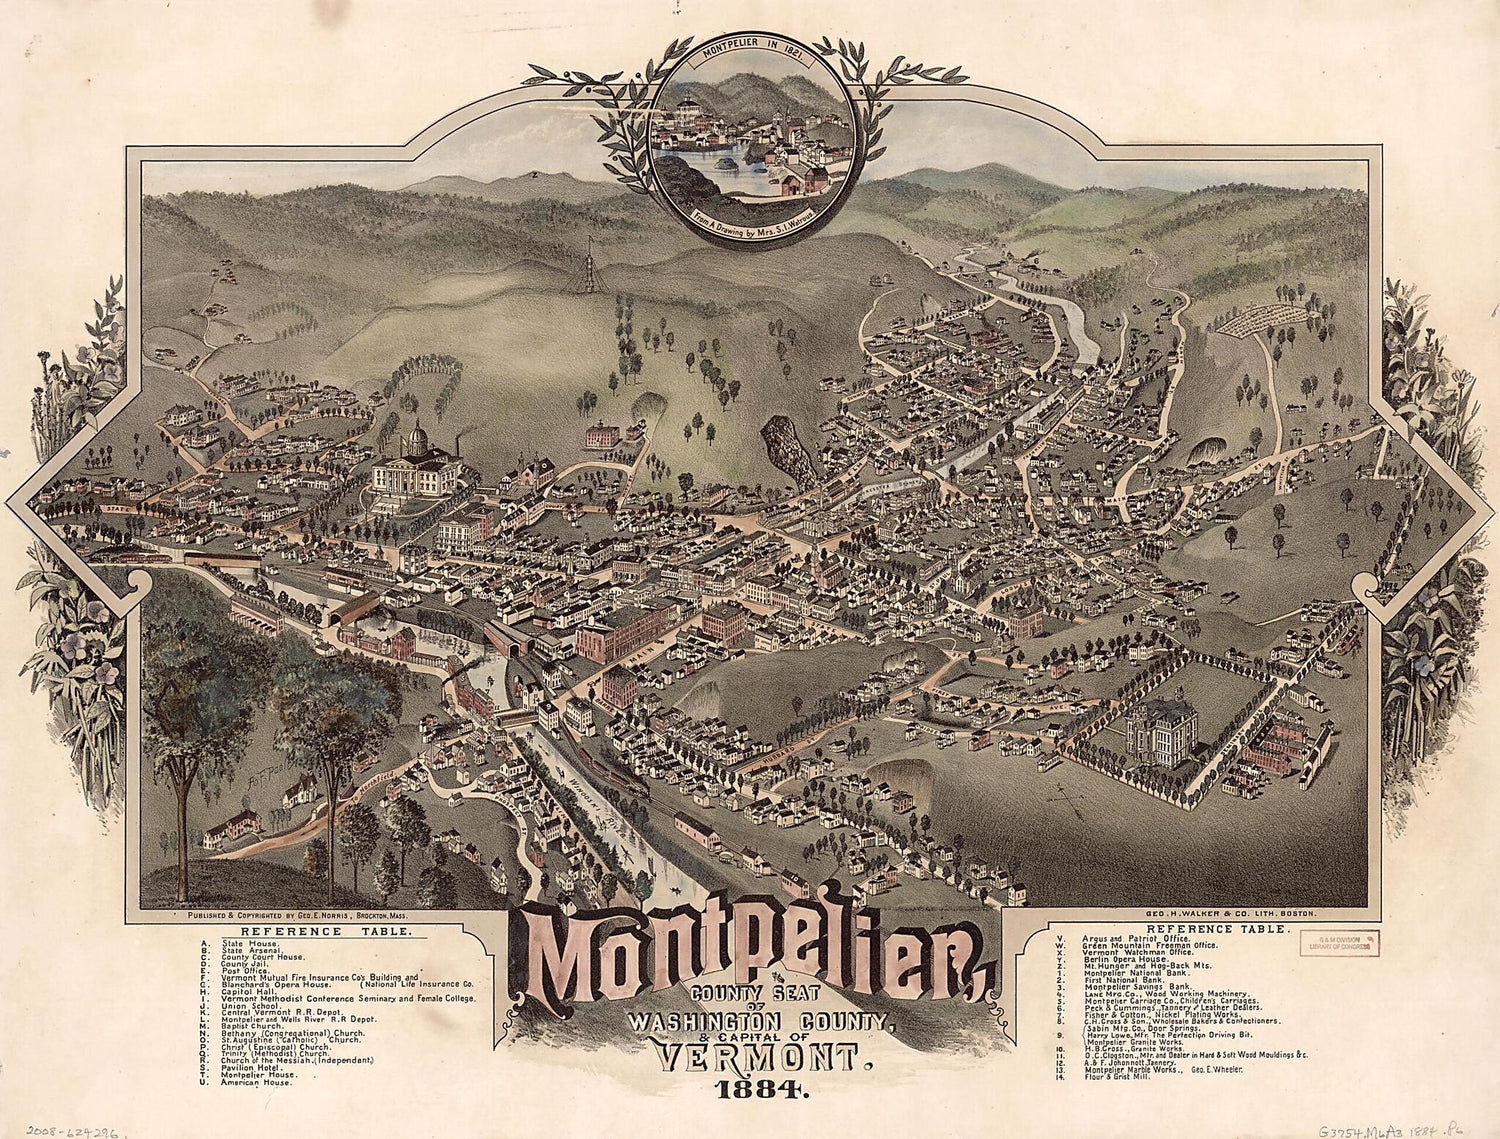 This old map of Montpelier, County Seat of Washington County &amp; Capital of Vermont : from 1884 was created by  Geo. H. Walker &amp; Co, George E. Norris, A. F. Poole in 1884